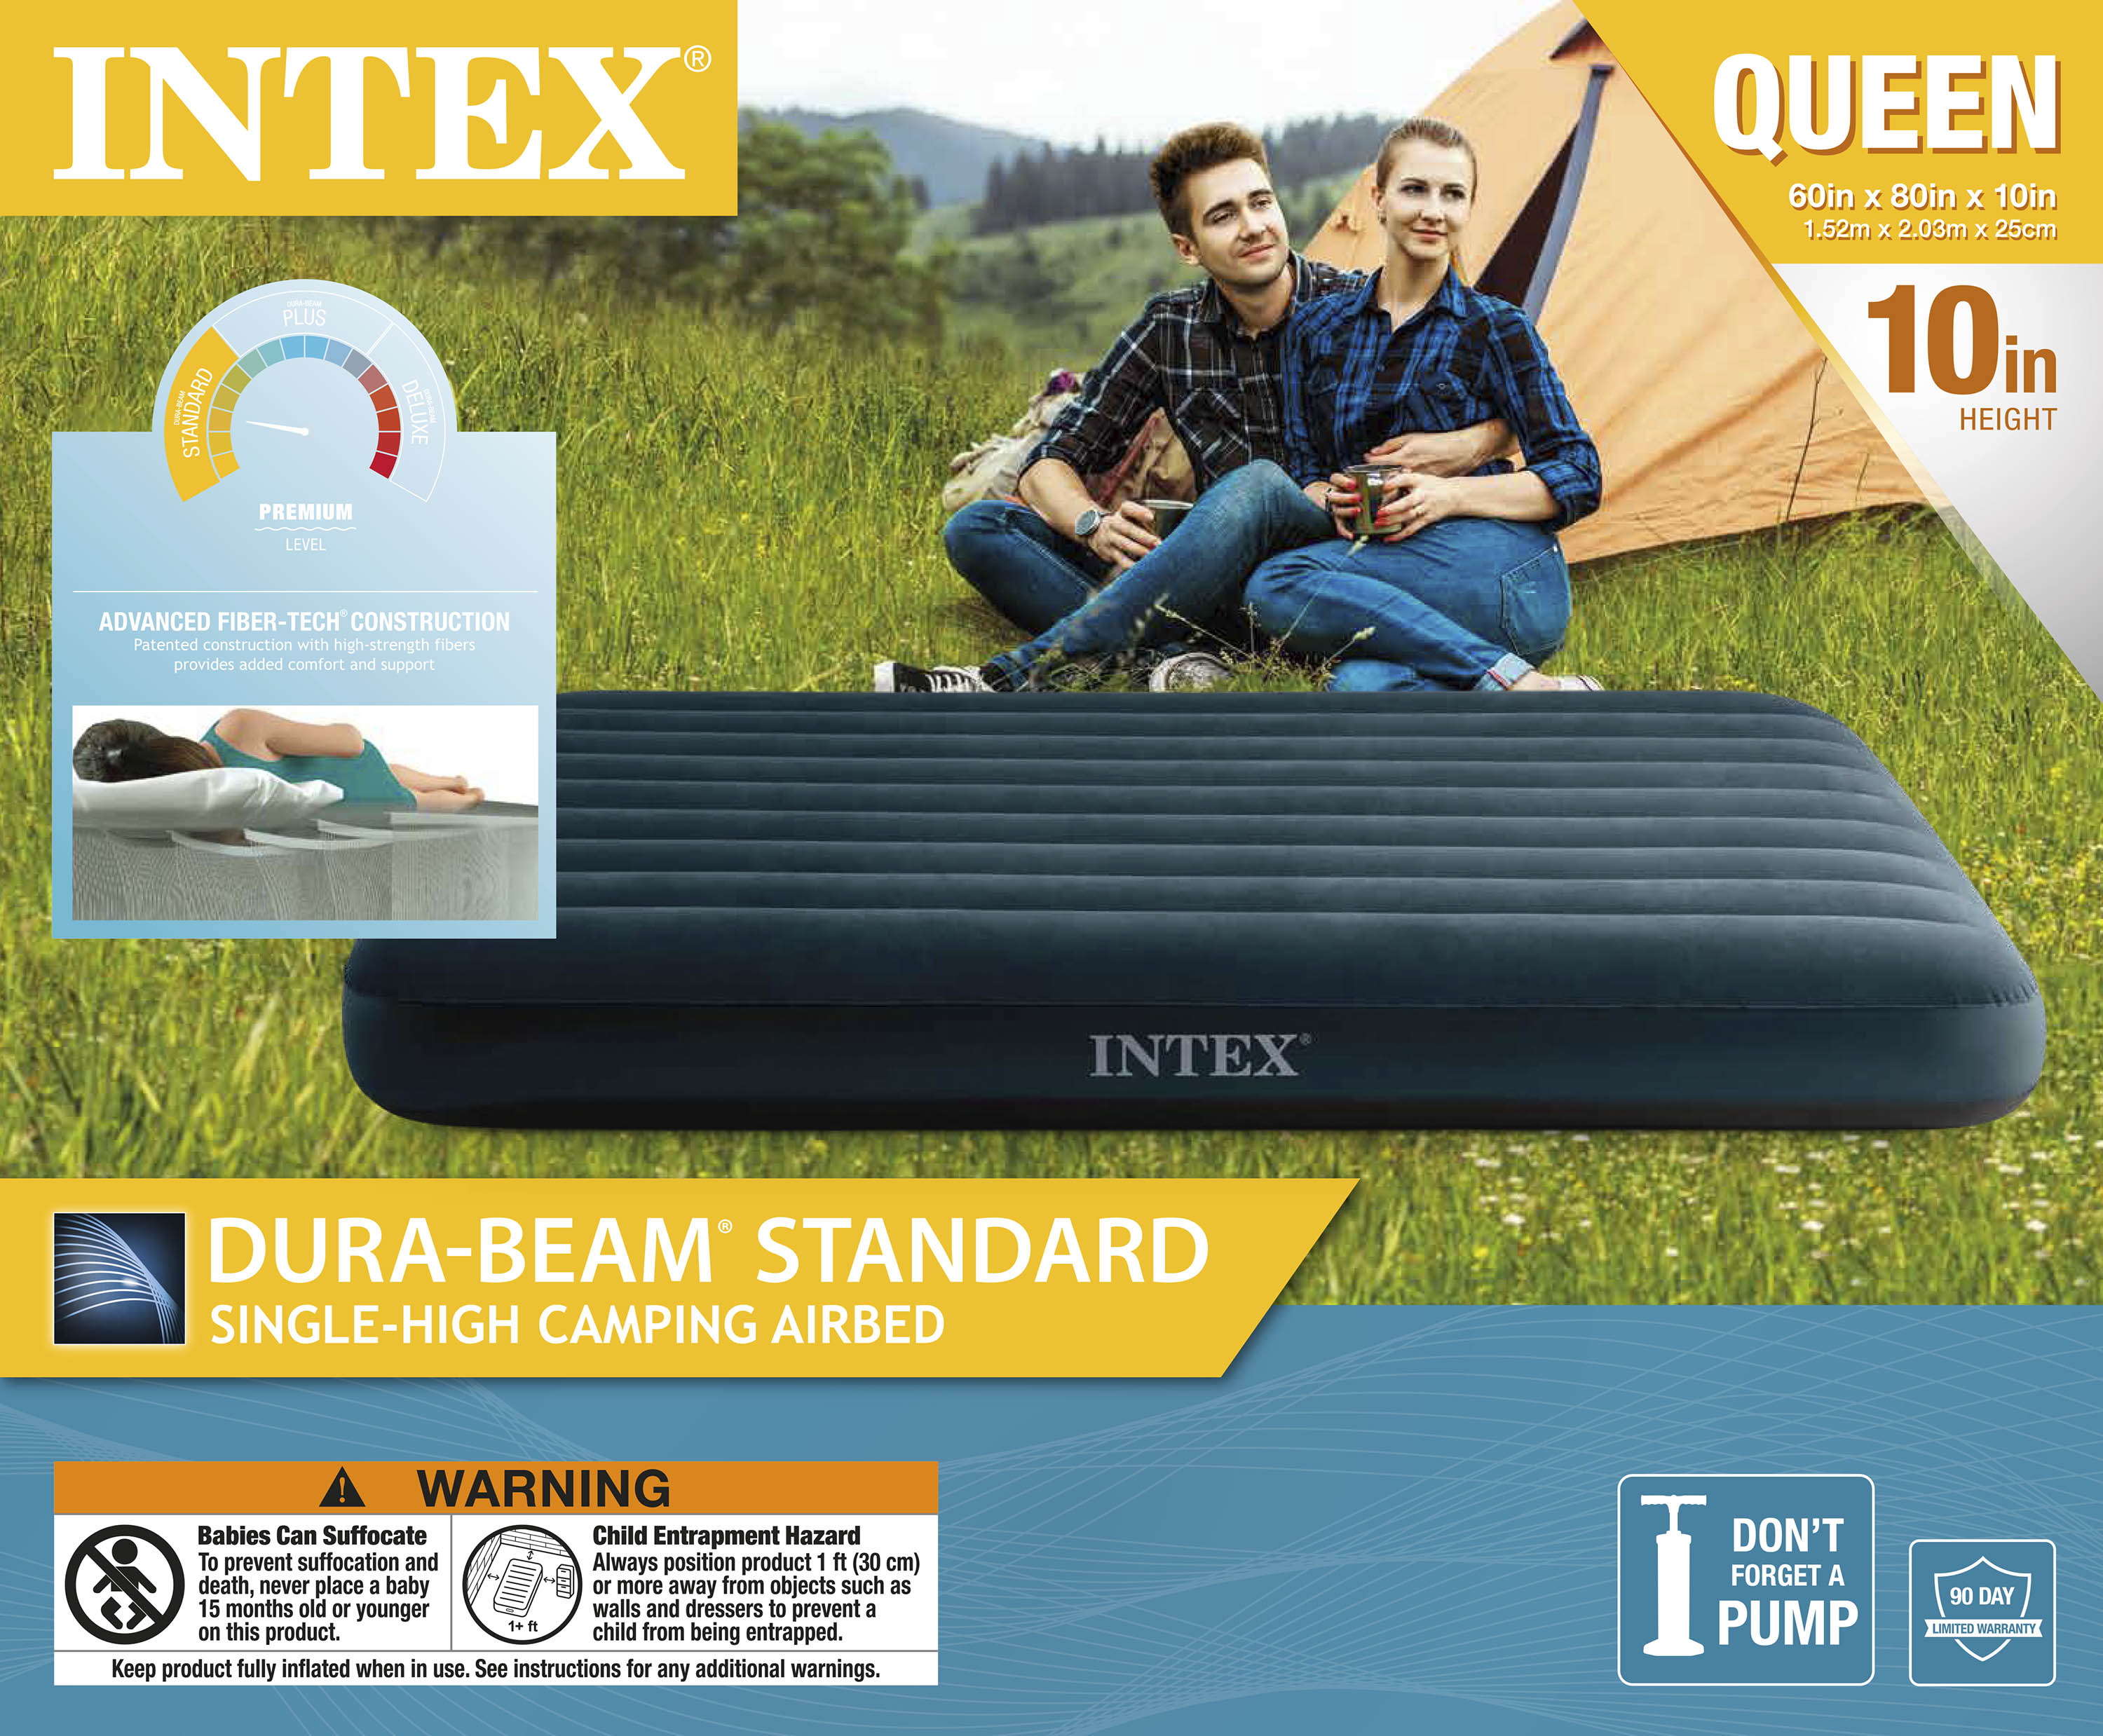 Intex 10in Standard Dura-Beam Airbed Mattress - Pump Not Included - Queen - image 2 of 9